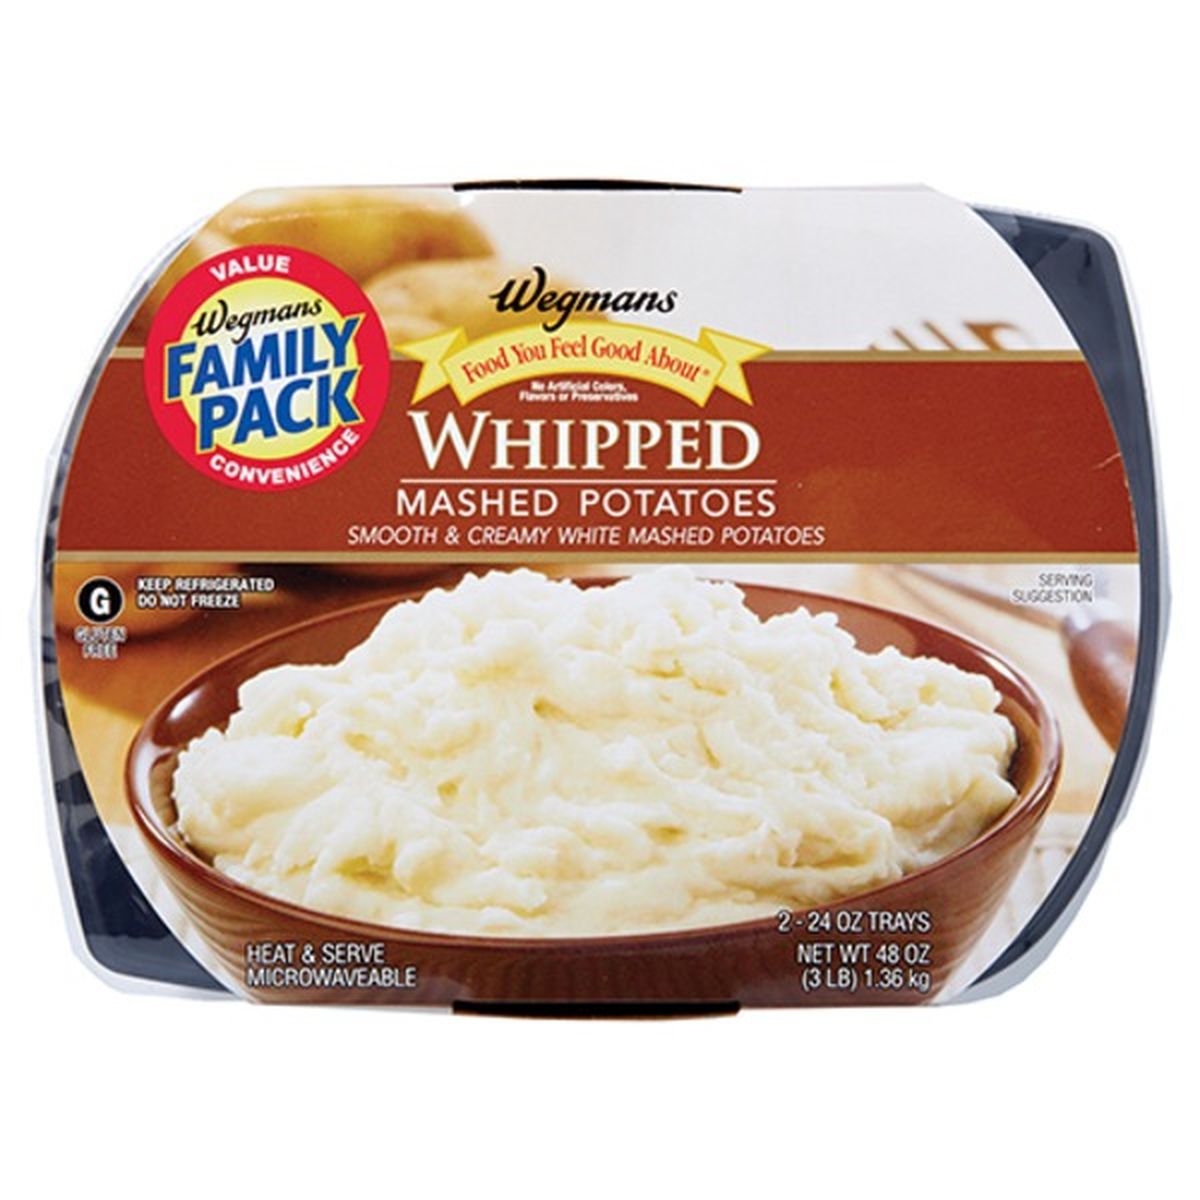 Calories in Wegmans Whipped Mashed Potatoes, FAMILY PACK